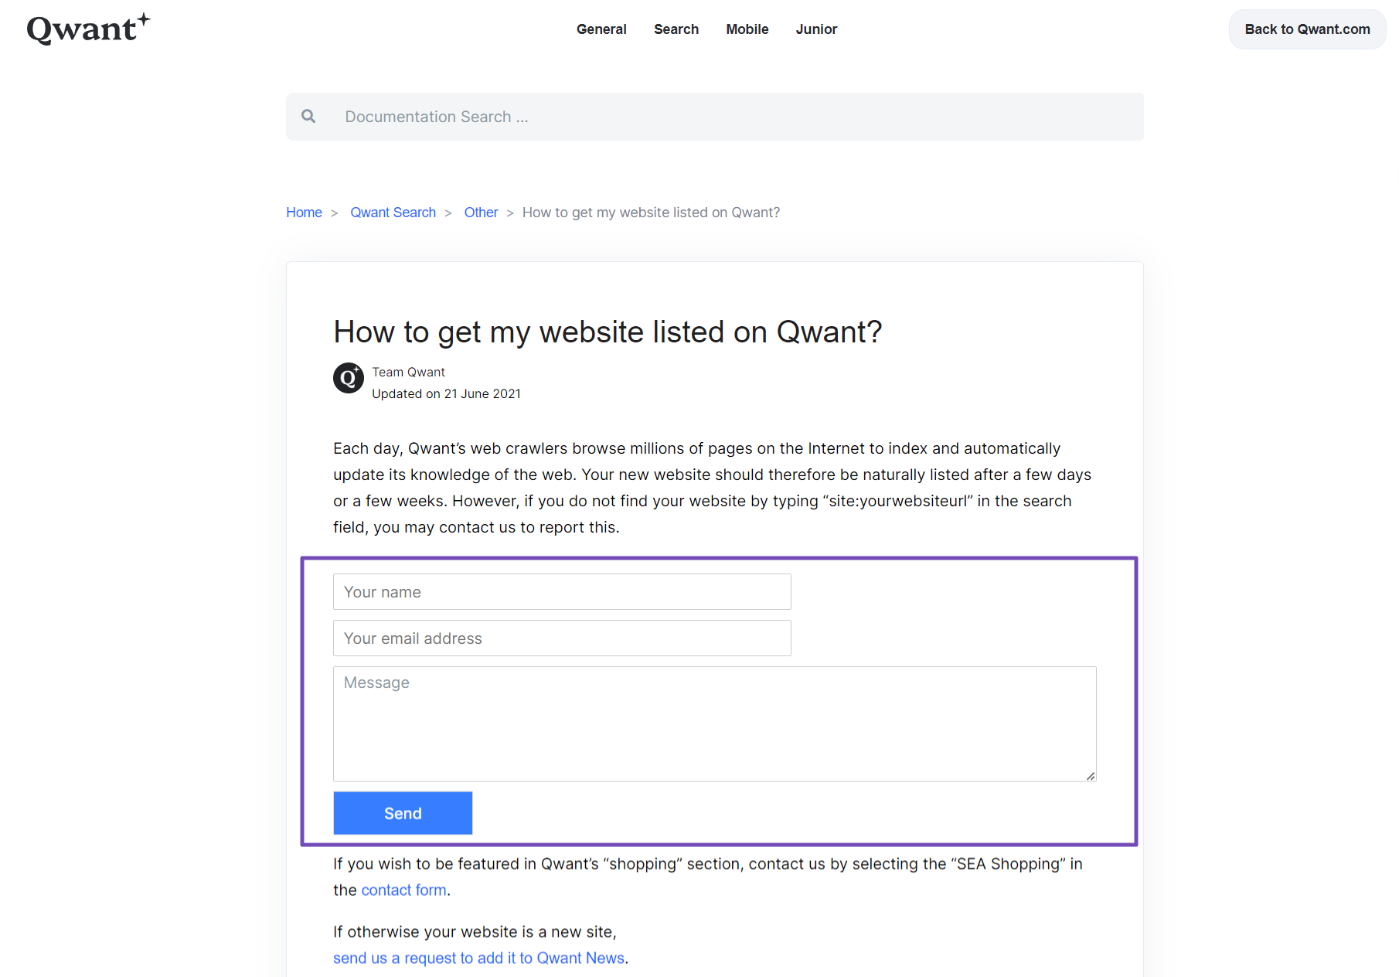 Submit your website to Qwant